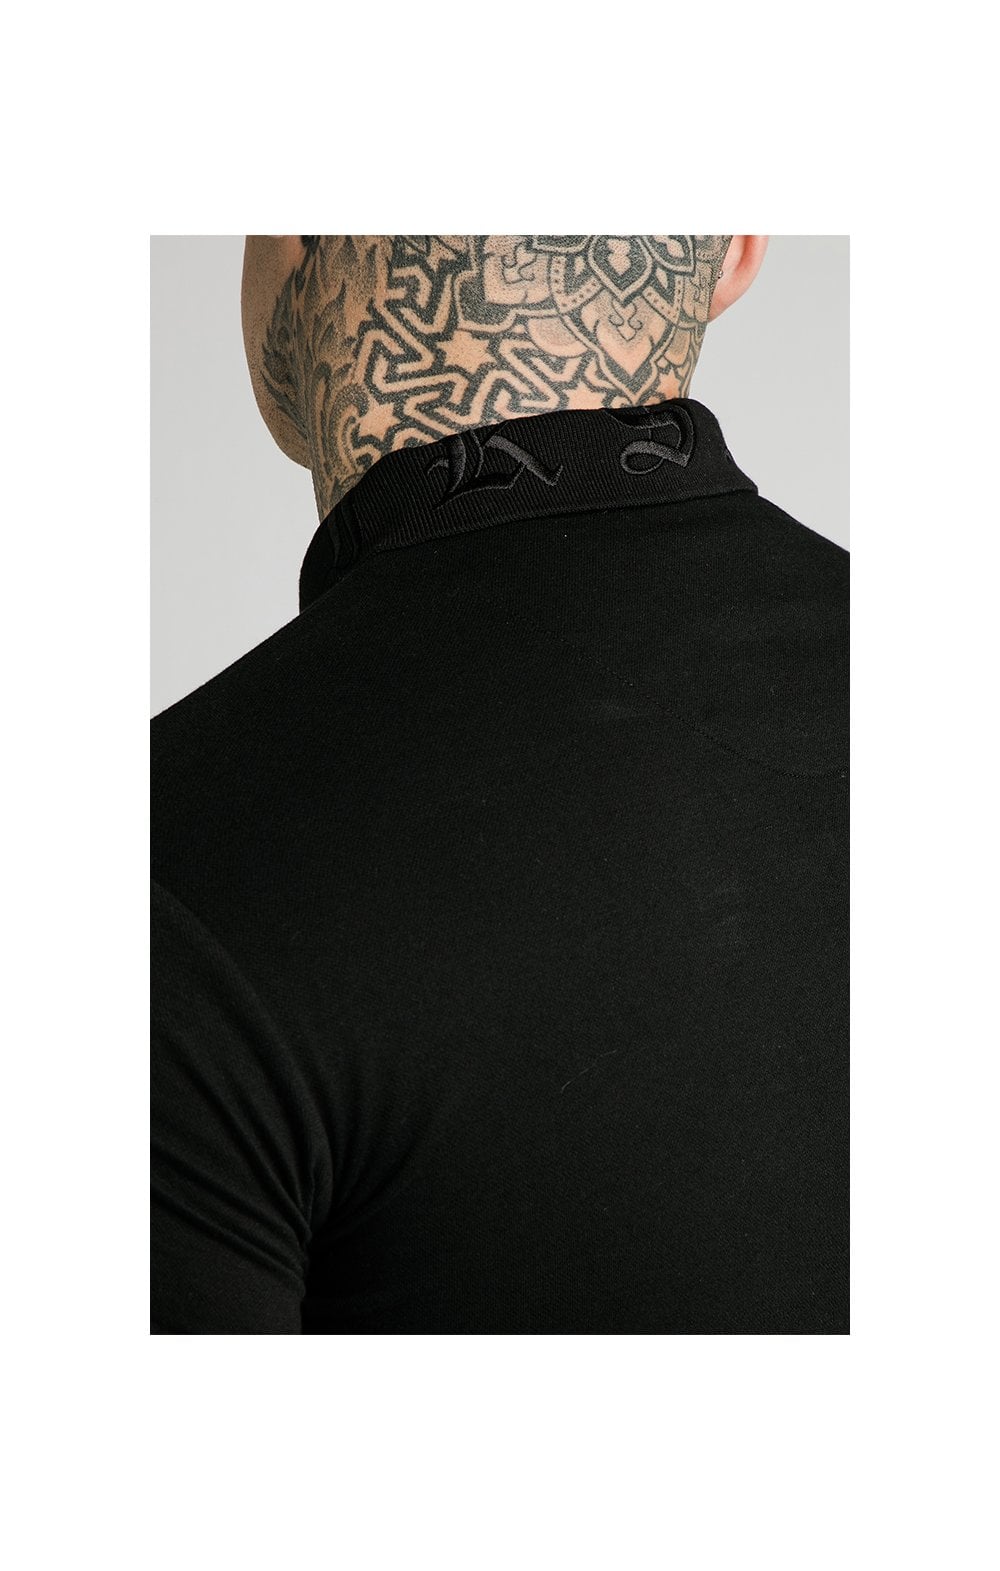 SikSilk S/S Old English Inset Cuff Polo - Black (2)